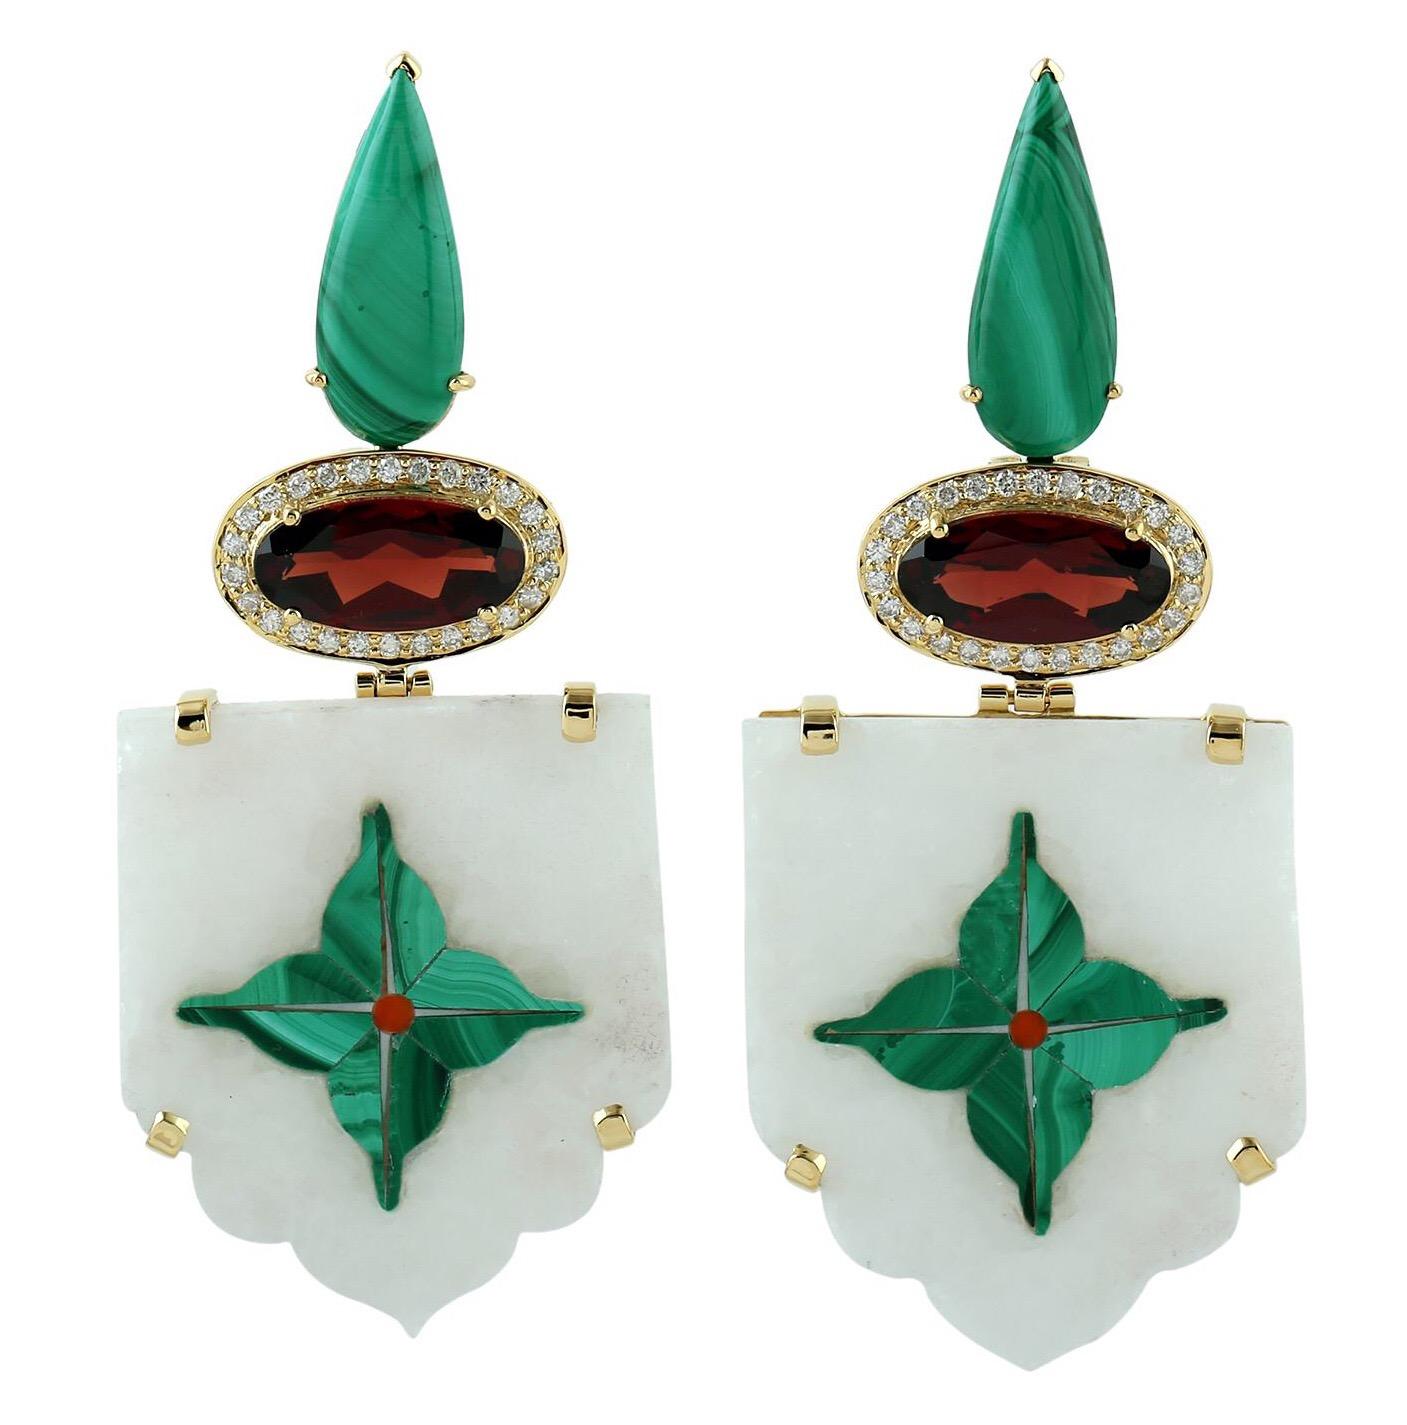 These intricate inlay earrings feature a unique hand painted floral malachite miniature art set with 18K gold & diamonds.  It is set in 7.5-carats Garnet, 7.7 carats Malachite and .56-carats of diamonds.

FOLLOW  MEGHNA JEWELS storefront to view the